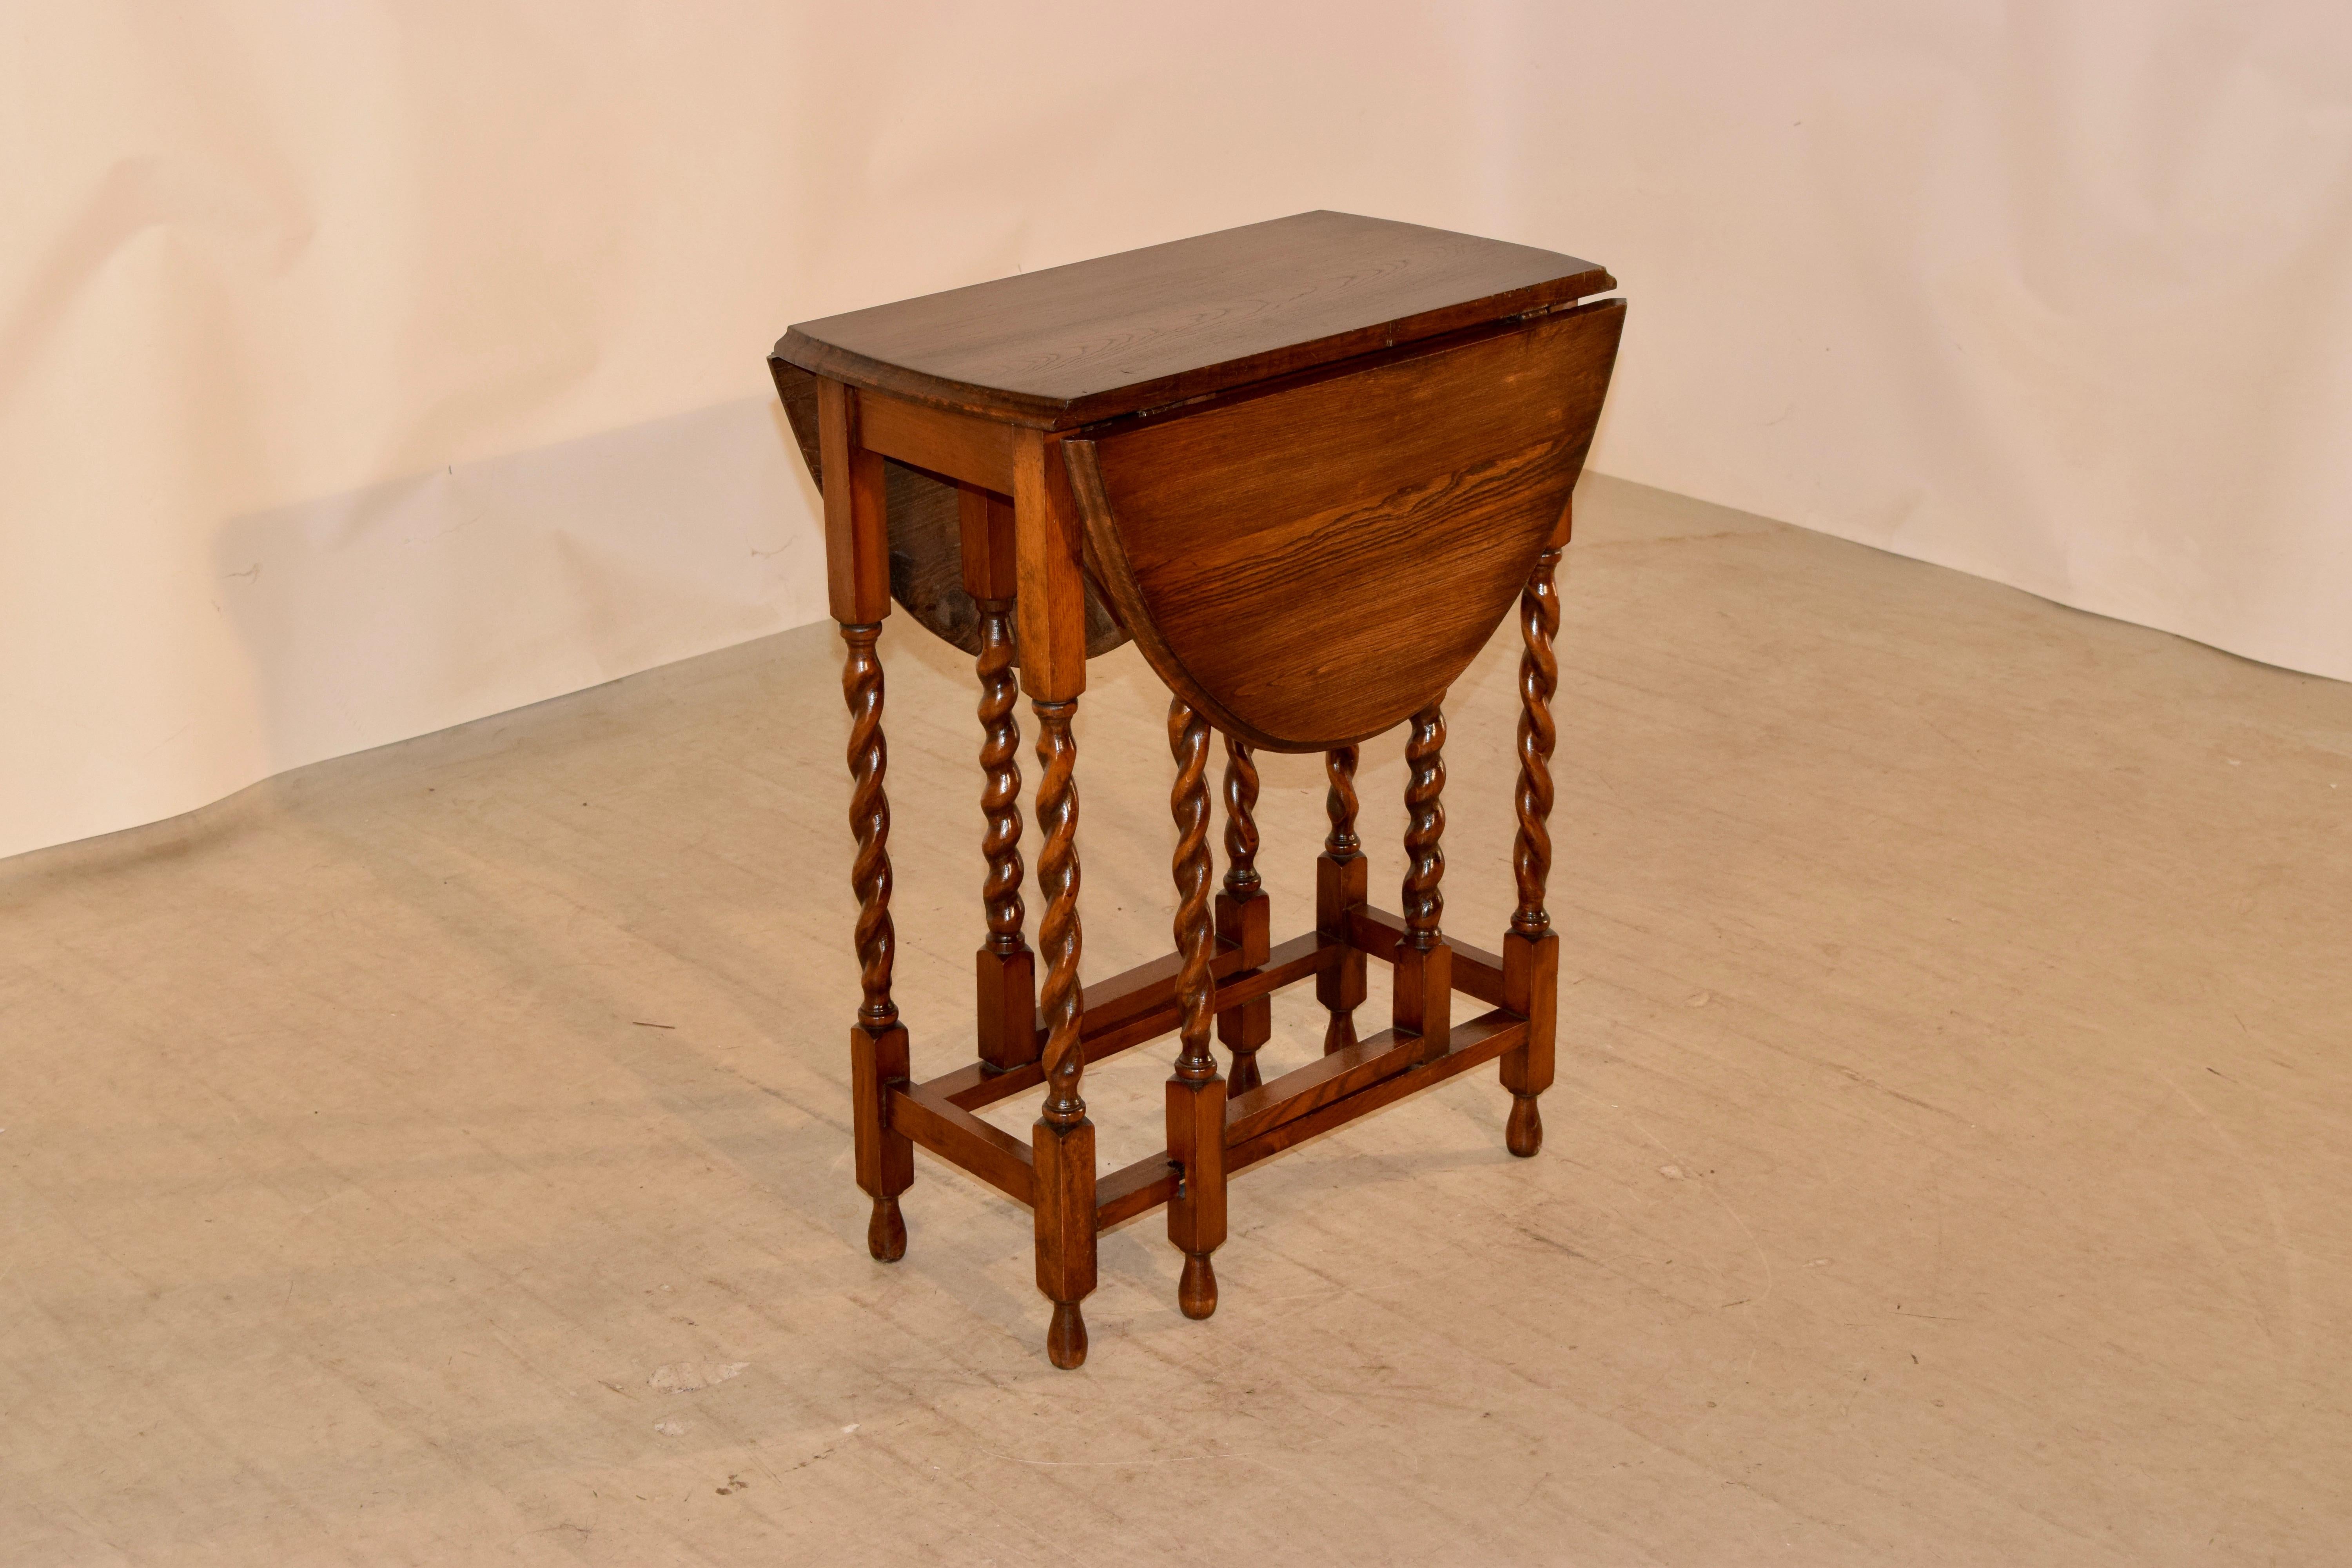 English oak gateleg table with a beveled edge around the top following down to a simple apron and supported on hand-turned barley twist legs, joined by simple stretchers, circa 1900. Raised on hand-turned feet. Top open measures 35.13 x 23.5.